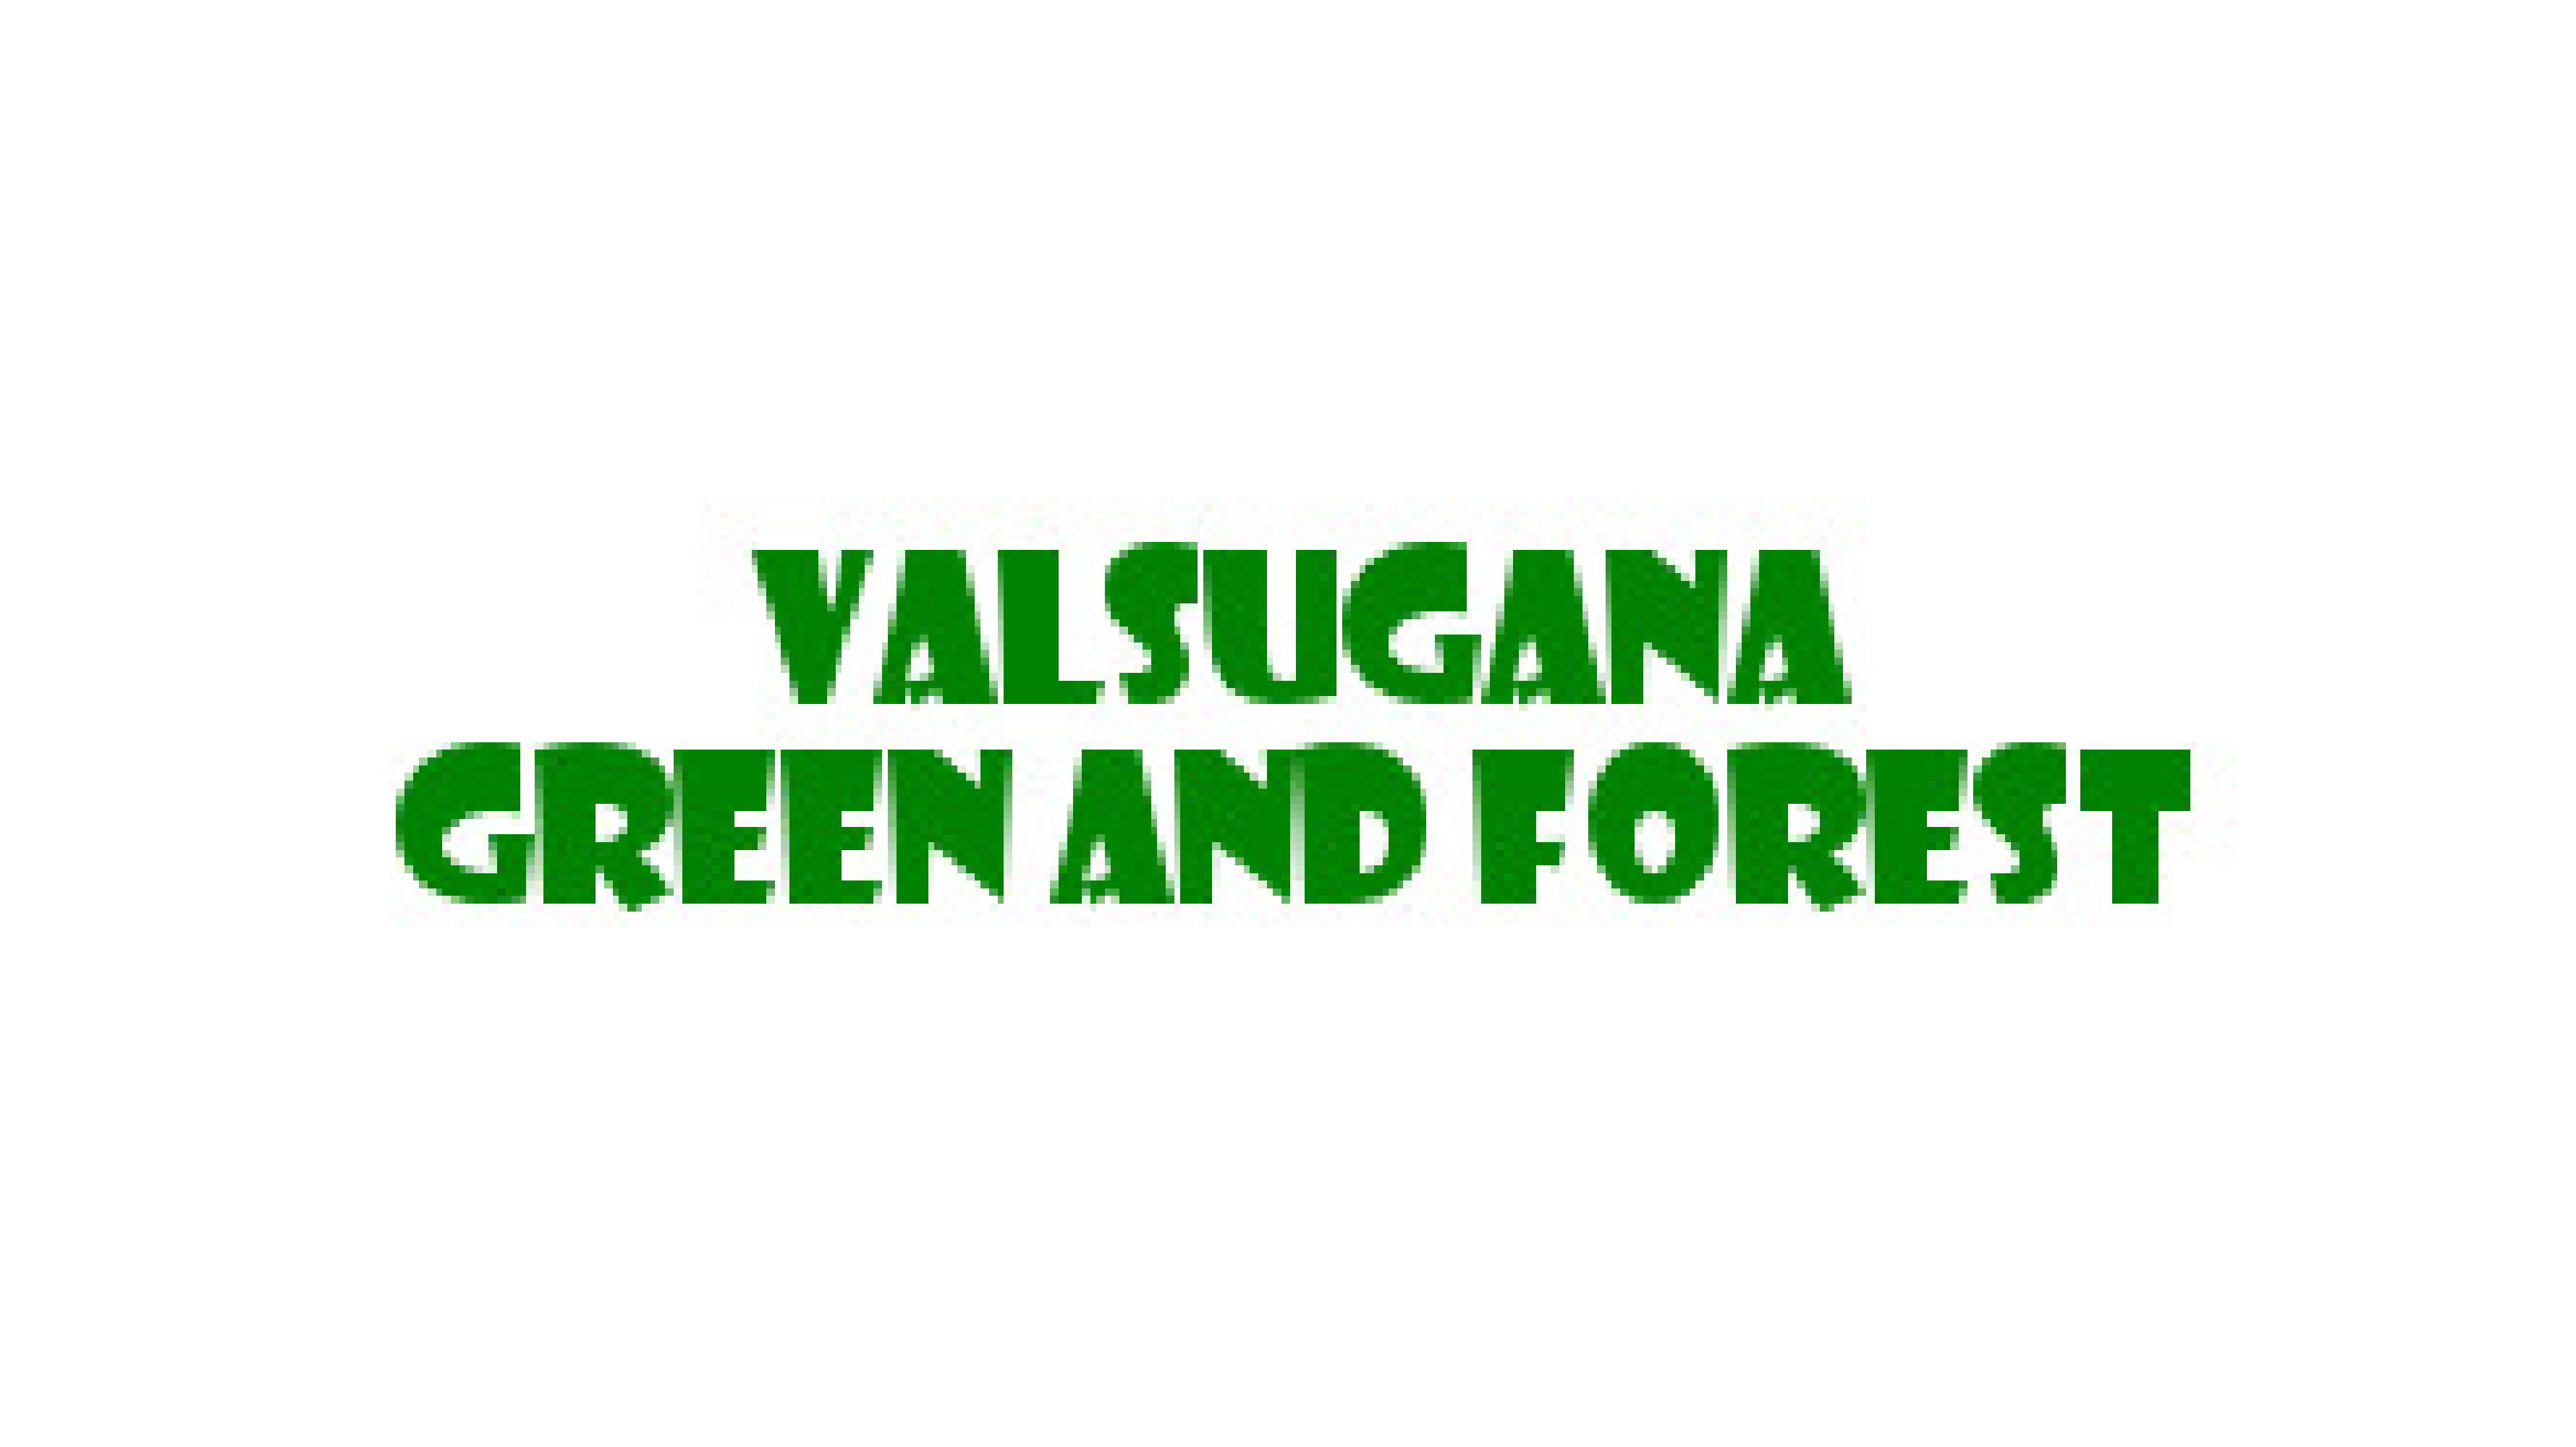 Valsugana Green and Forest